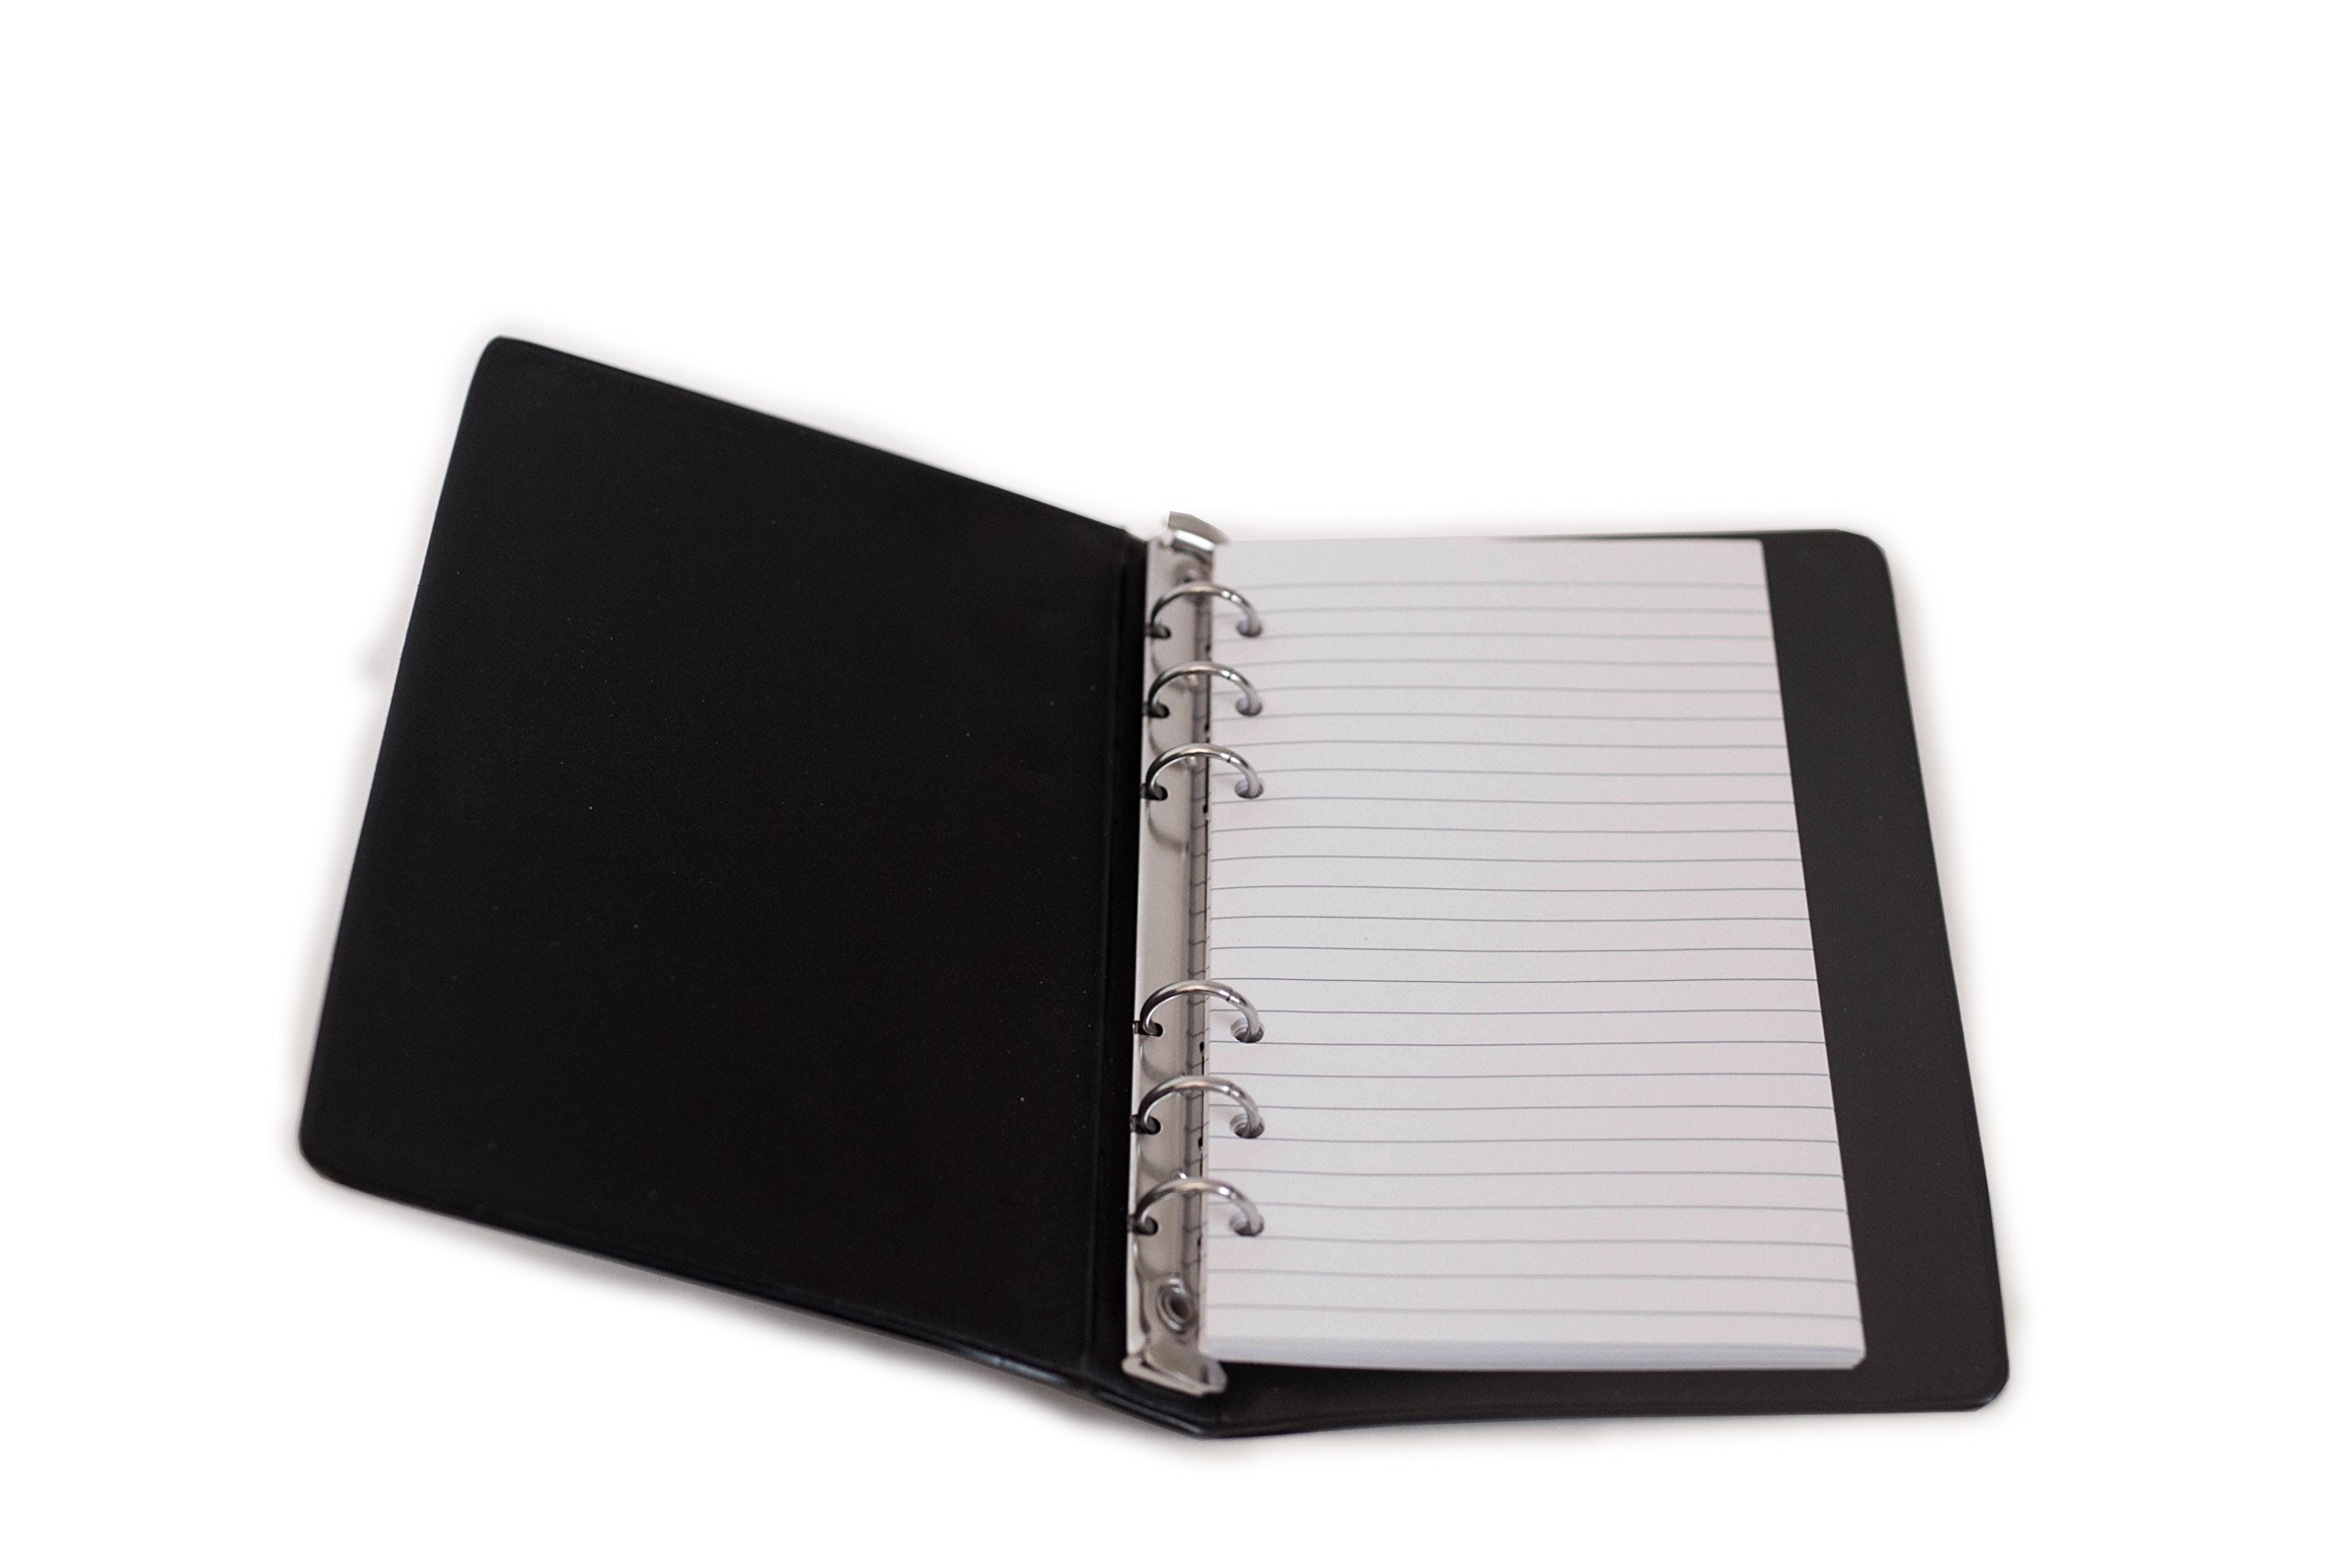 Loose-Leaf Memo Book 80 Pages + Free Refill 80 Pages